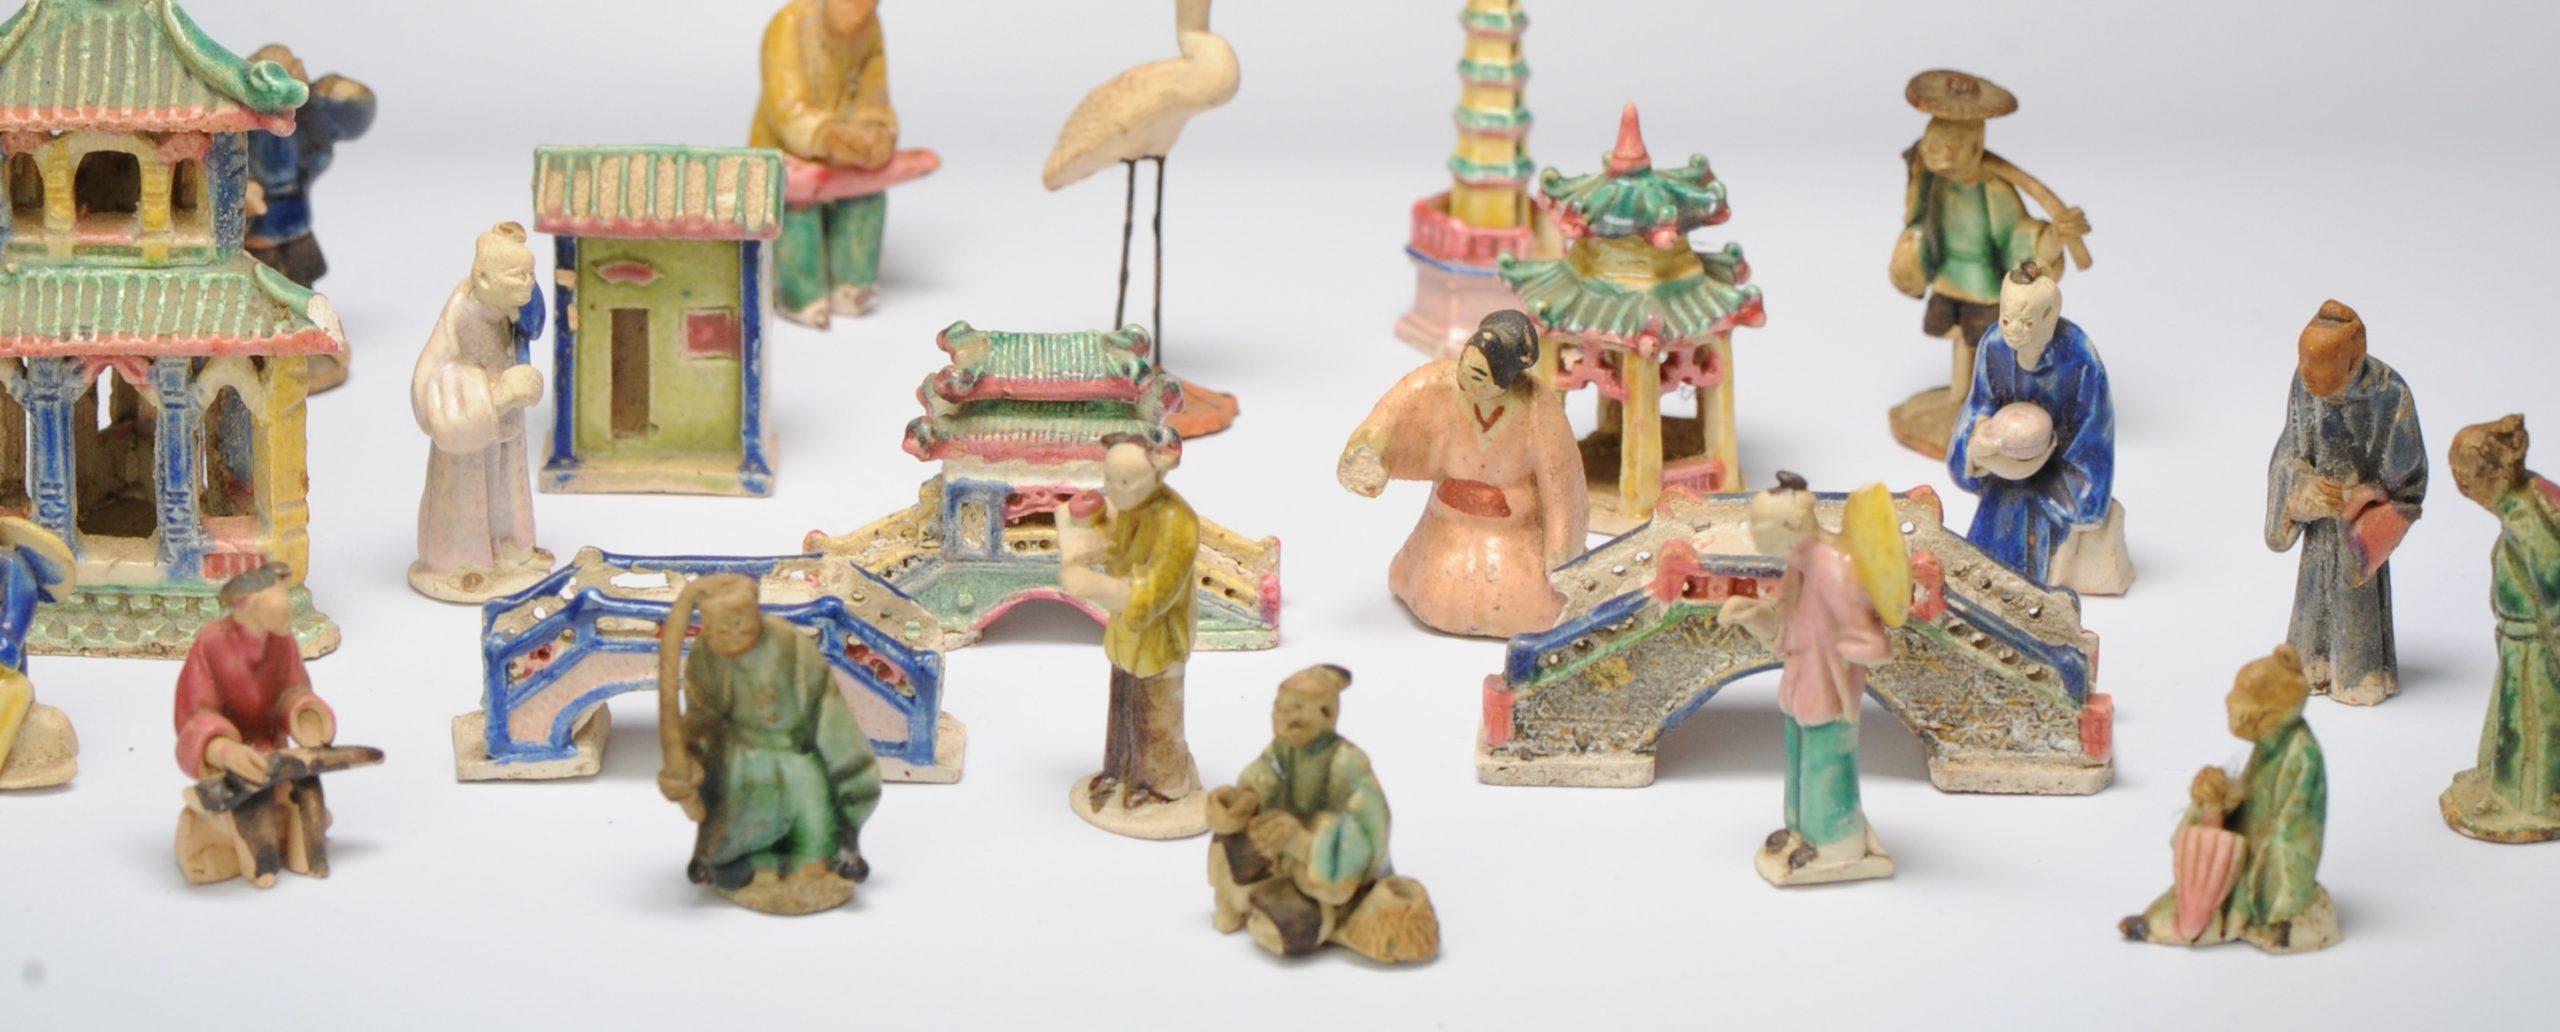 Description

Lovely Chinese set of Shiwan figurines. middel of 20th century.

Condition

Overall Condition They had a life, with some damage like missing pieces etc. In general used but nice condition. Size 23-70mm in height


Period
20th